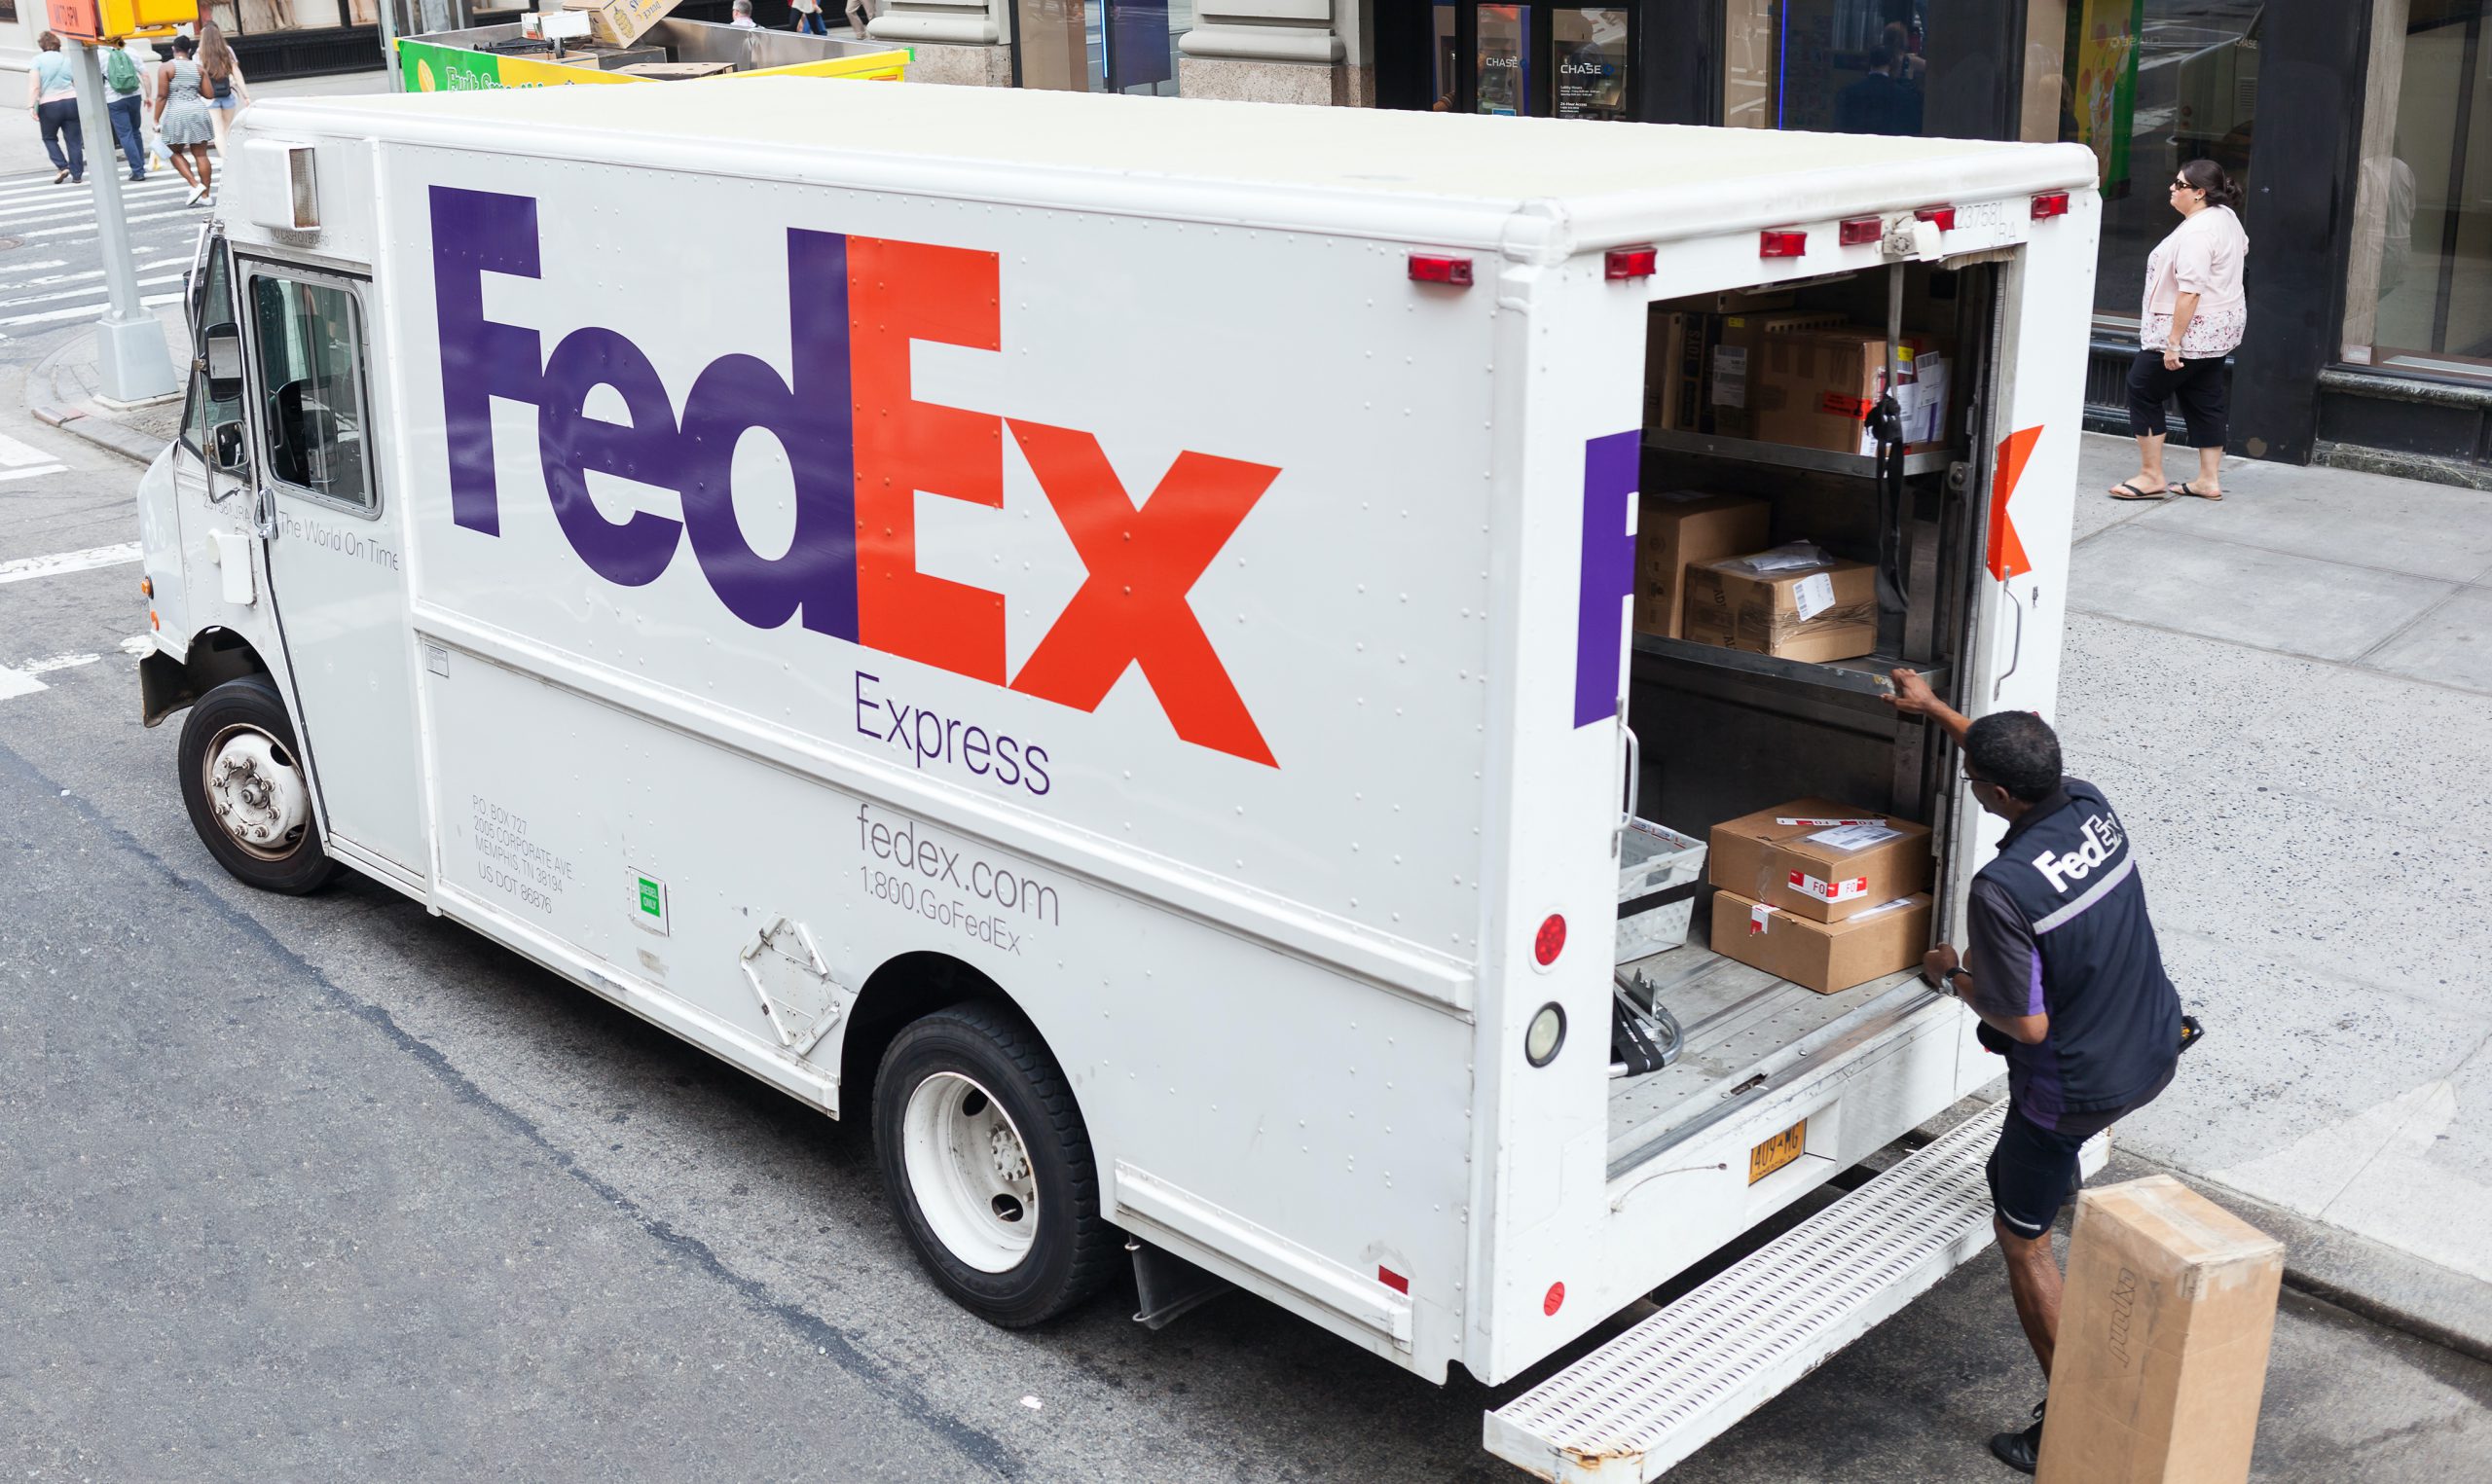 A FedEx worker reaches into the back of an open FedEx van to deliver a package outside a busy street corner